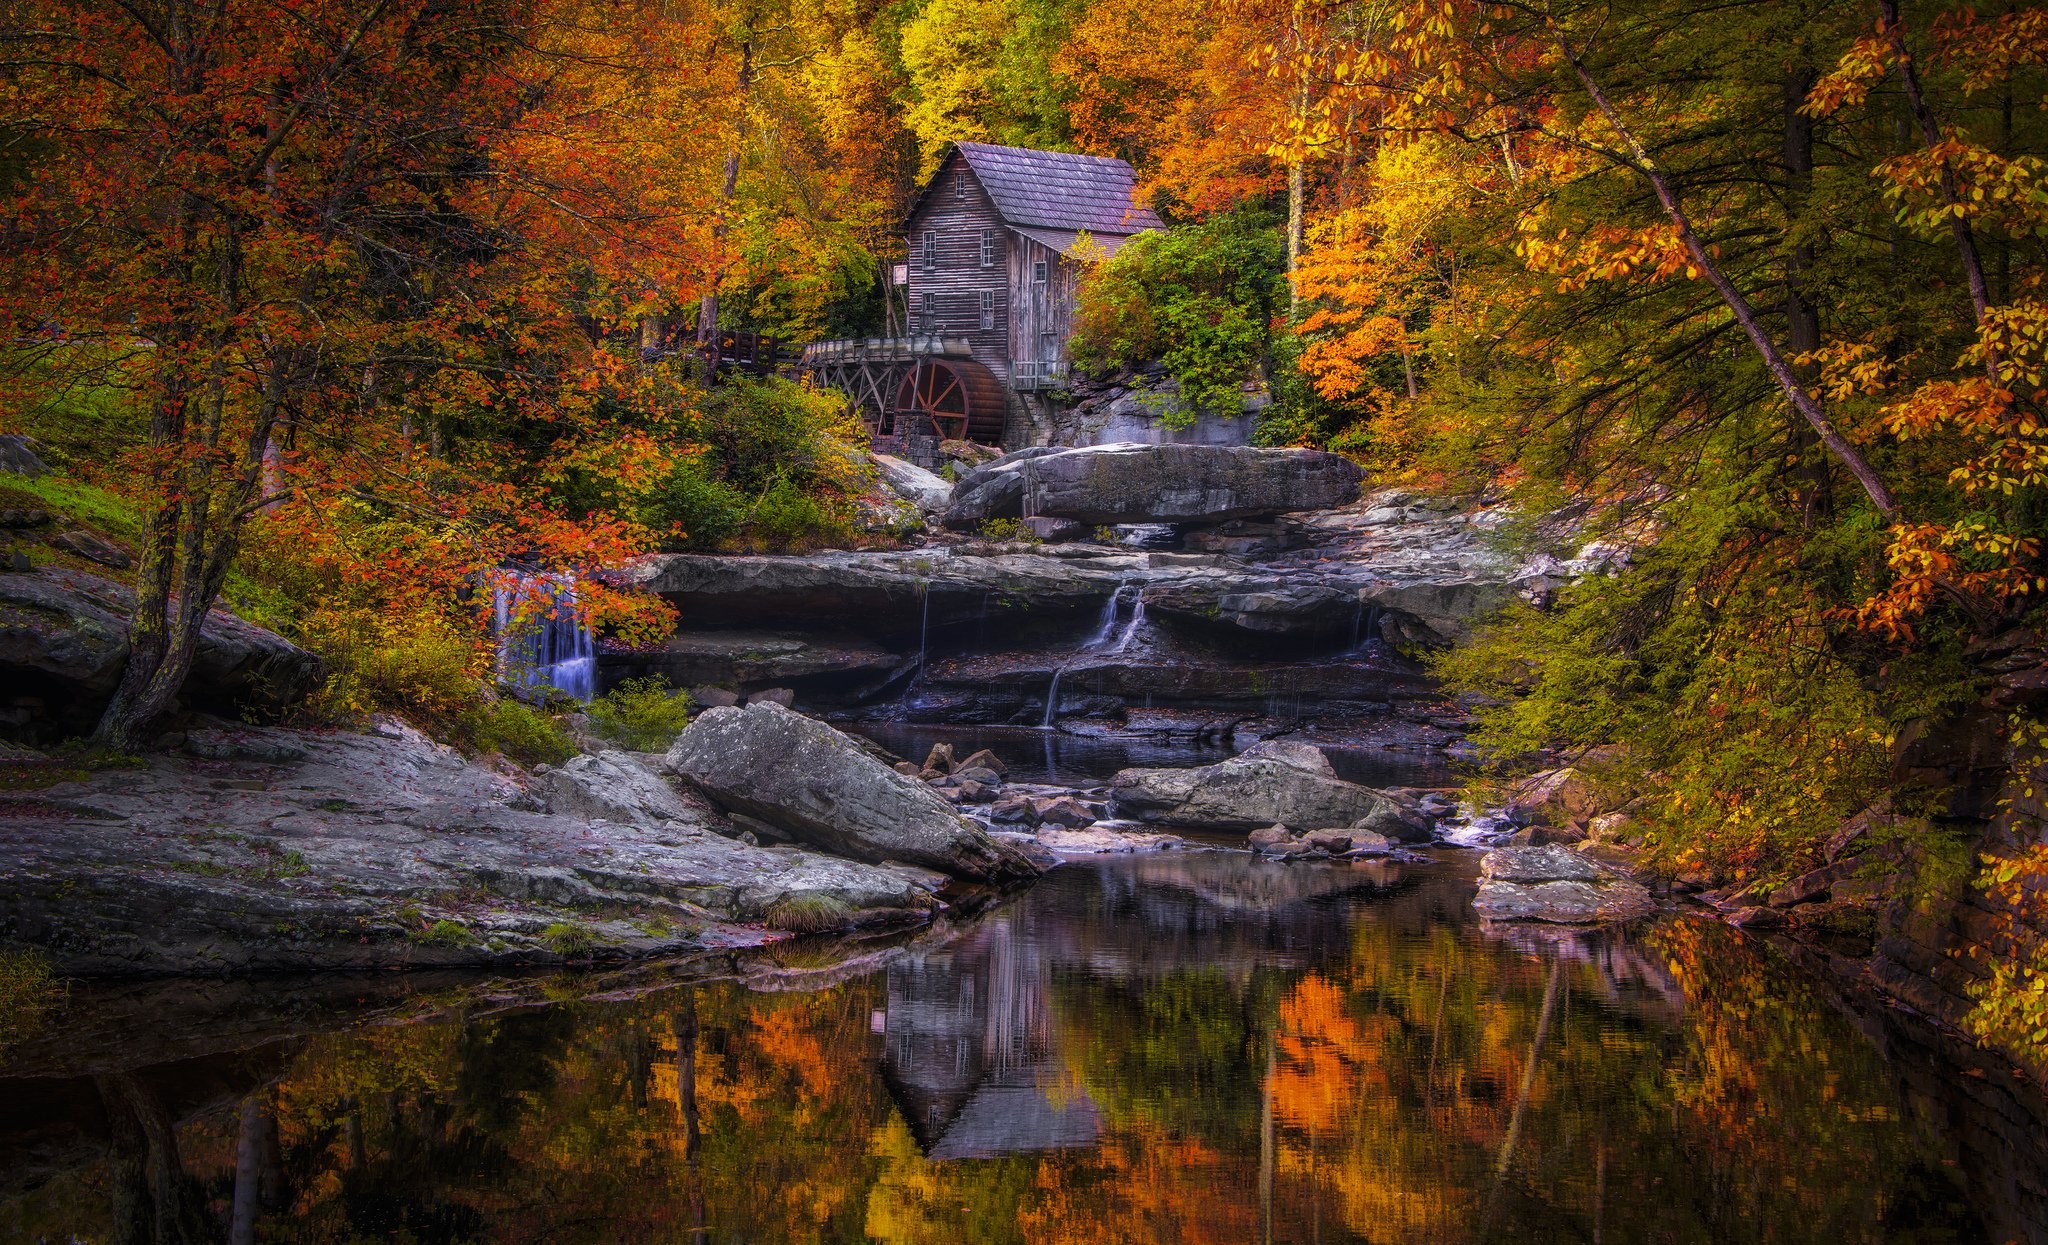 Grist Cool Image Mill Wallpaper Stones West Autumn